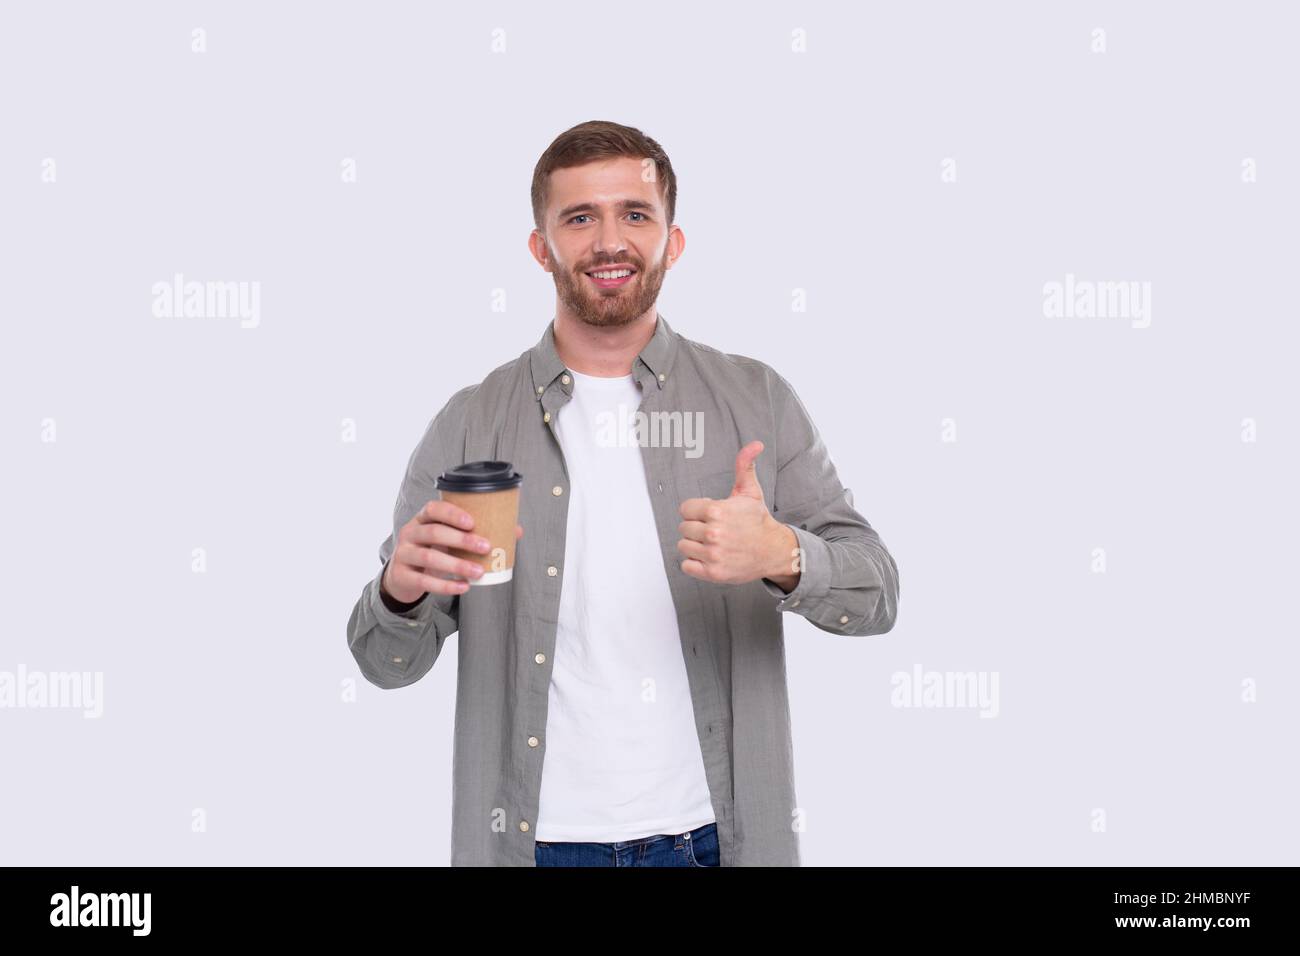 Coffee To Go Cup Showing Thumb Up. Coffee take away Cup in Hands. Man Isolated Stock Photo